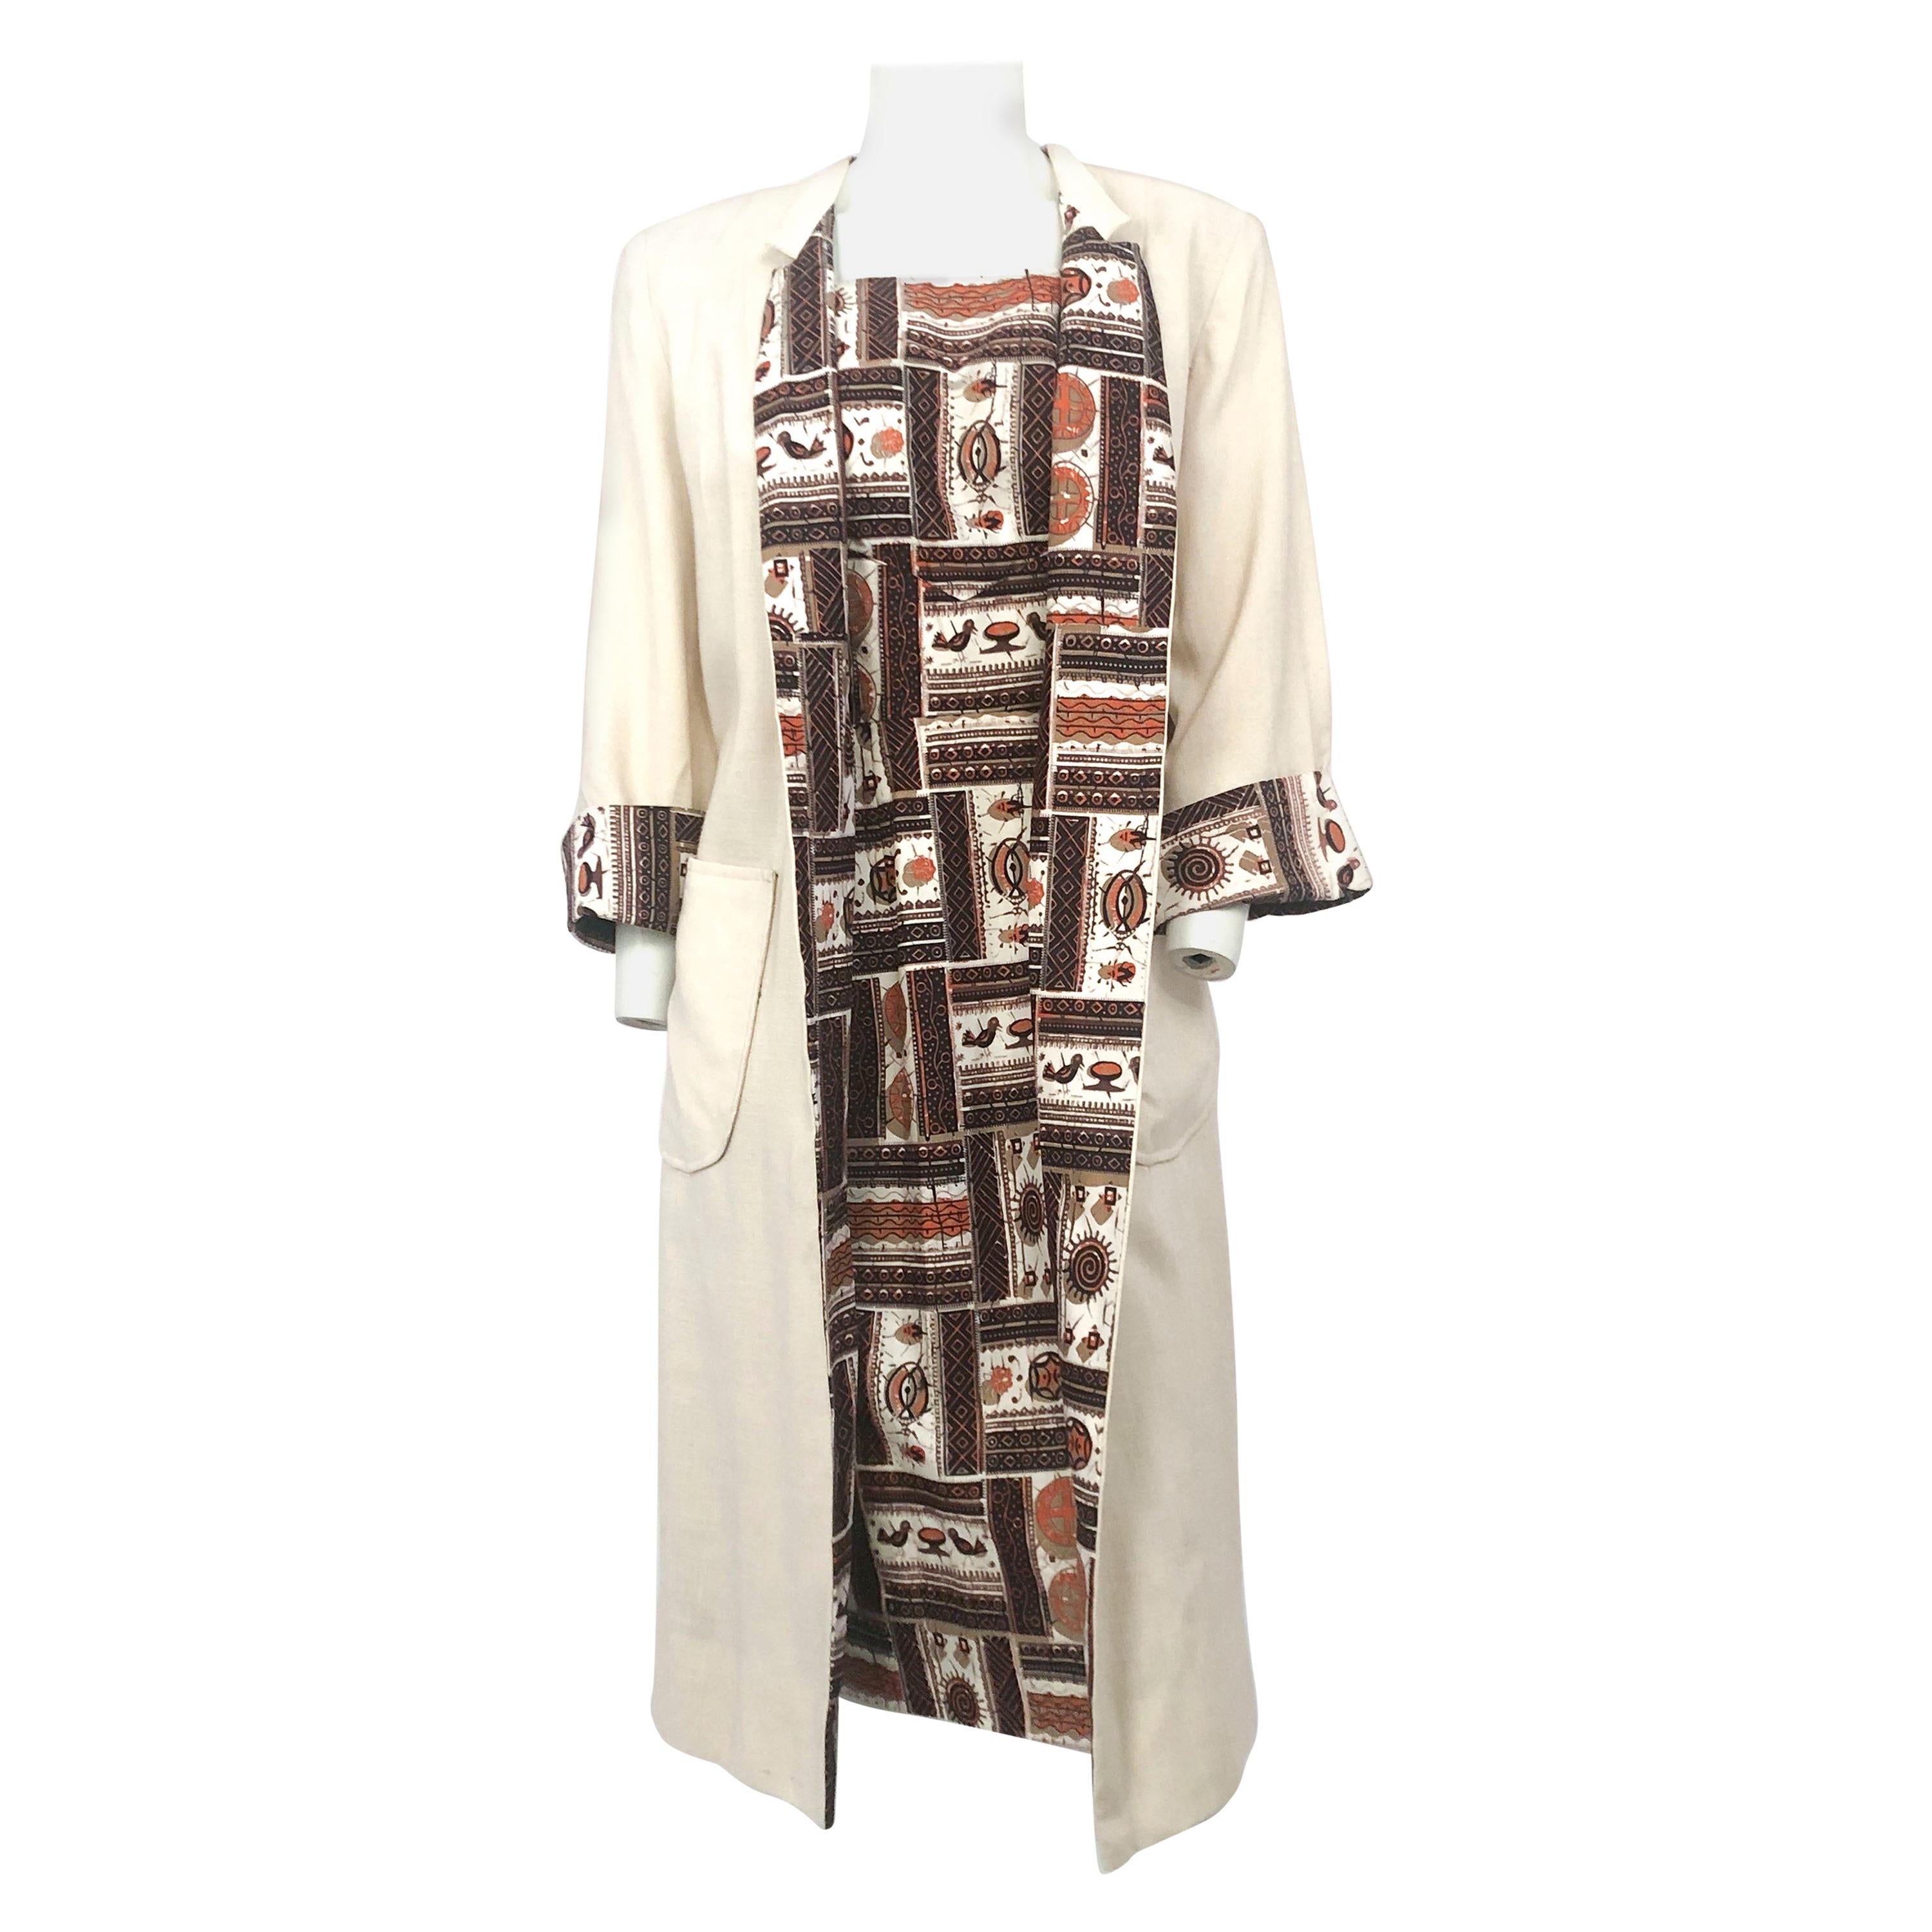 1950s Novelty Printed Cotton Dress with Coat 